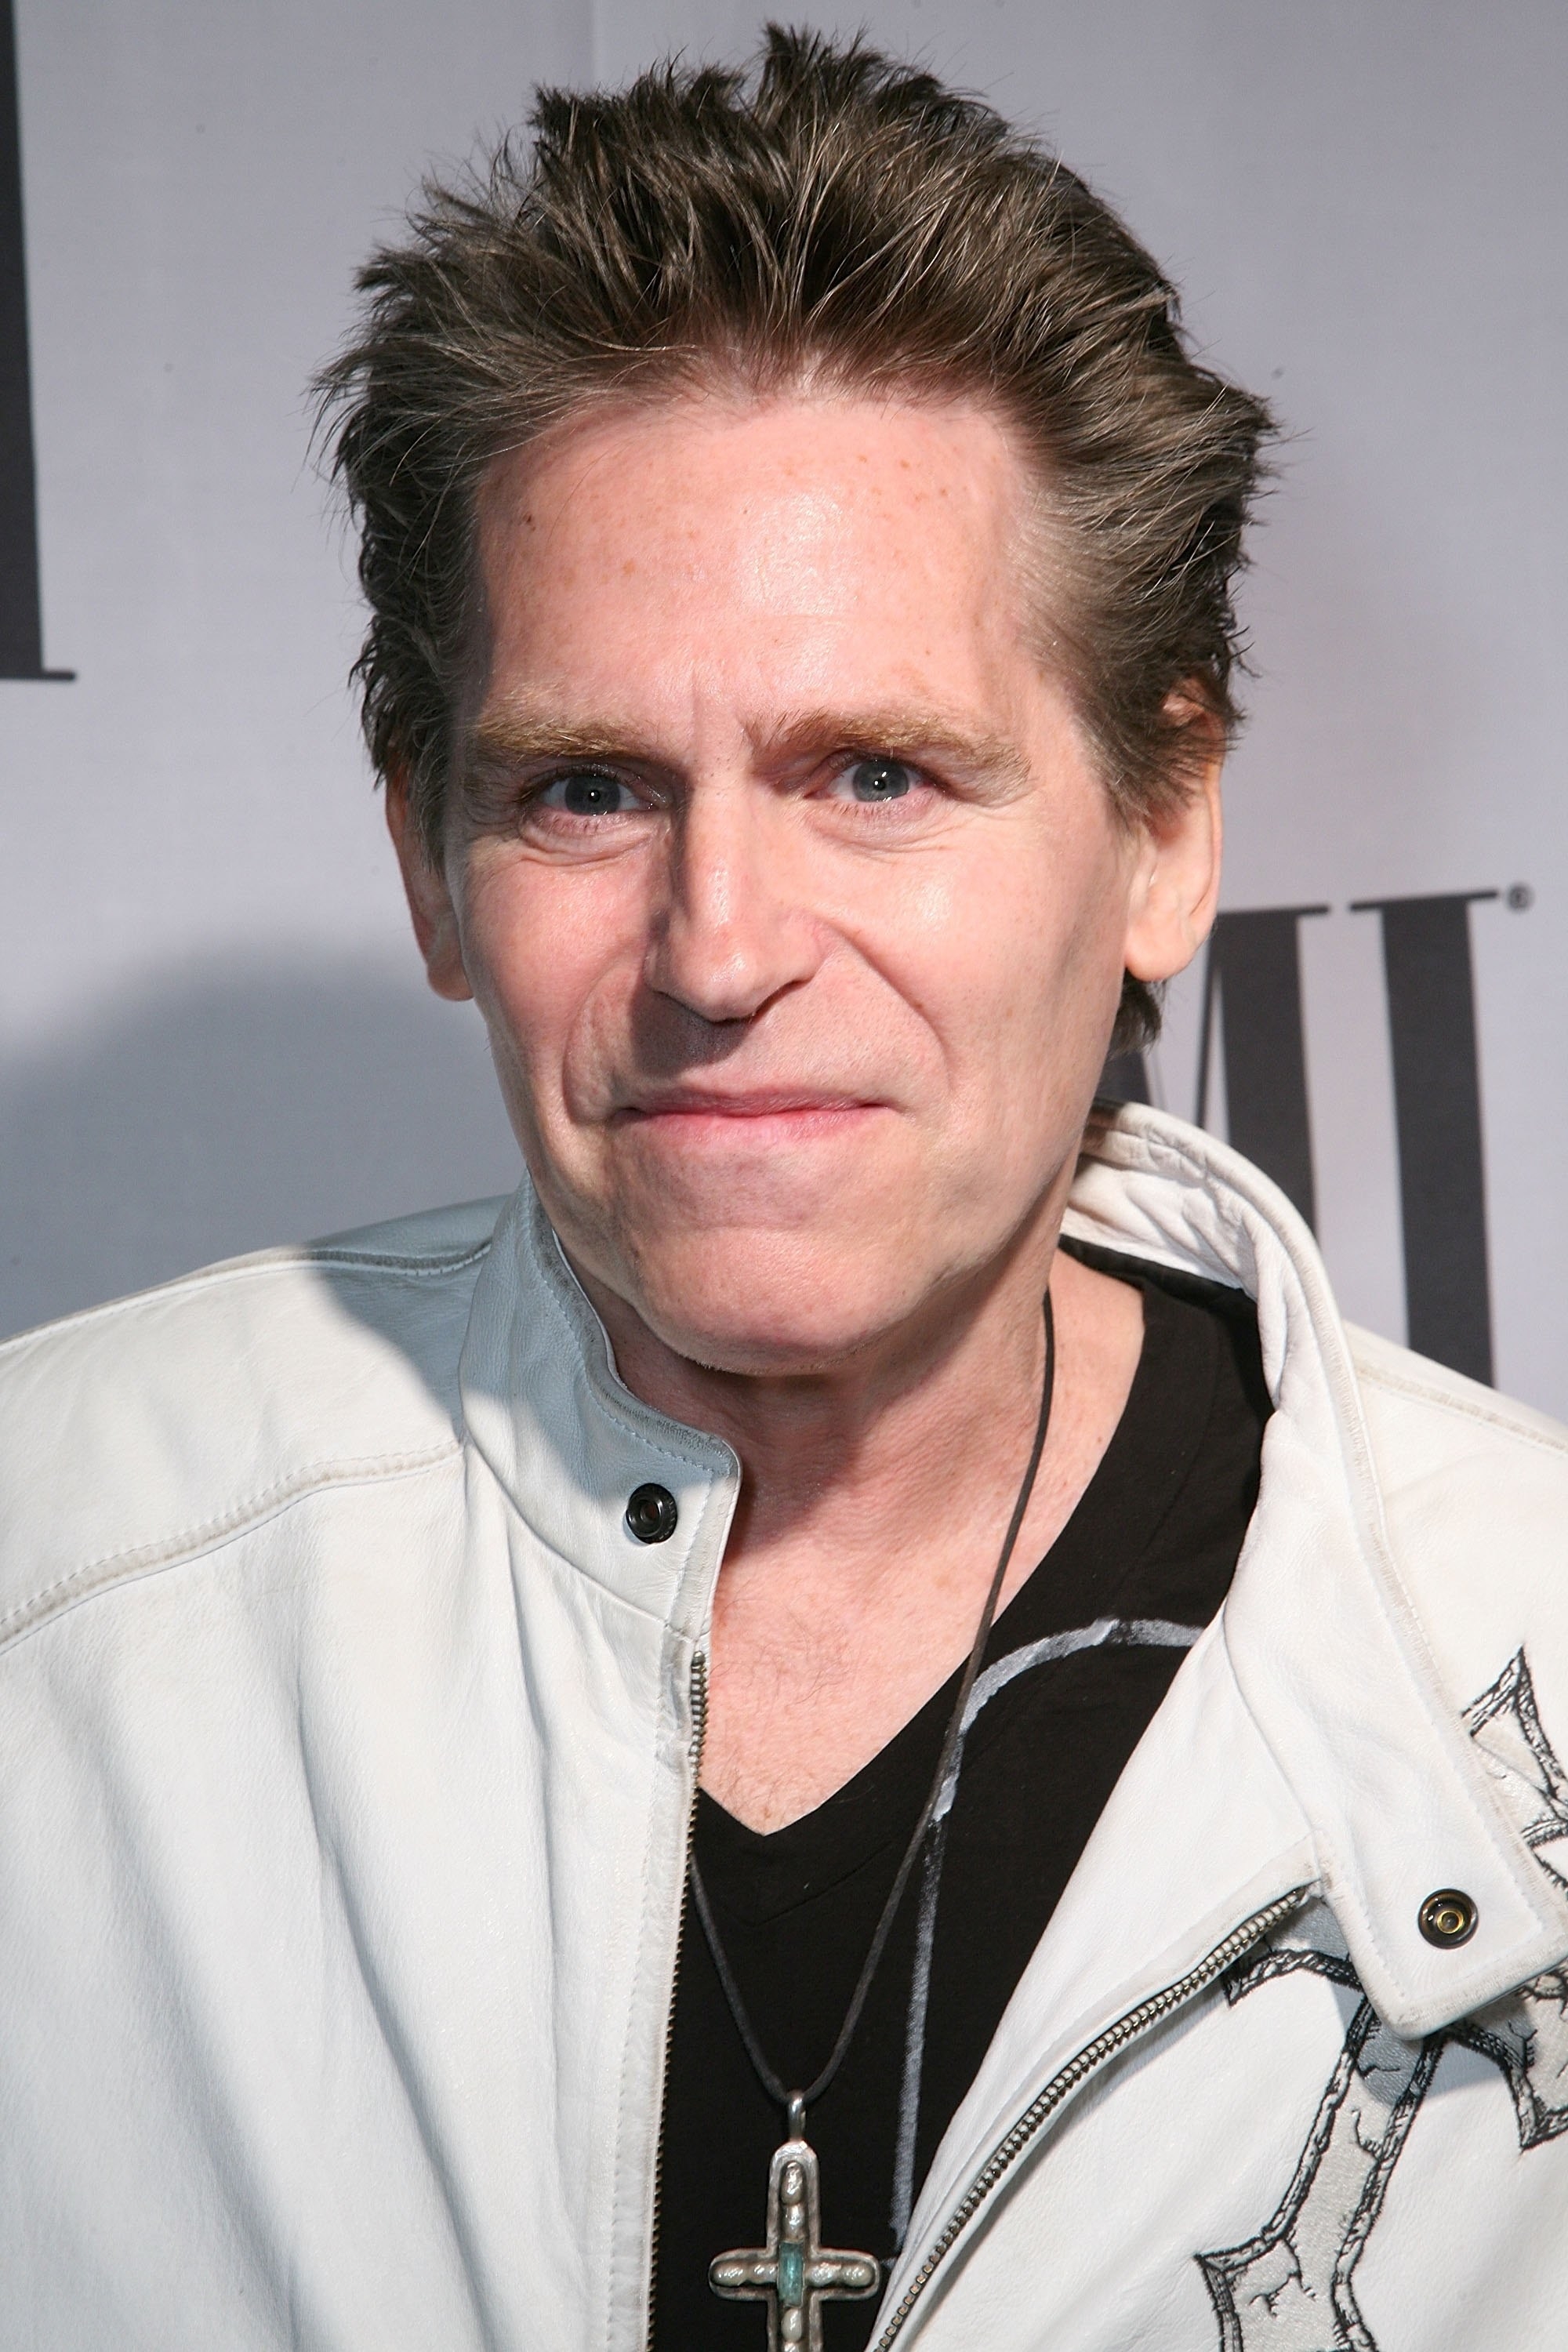 Jeff Conaway on the red carpet in 2009